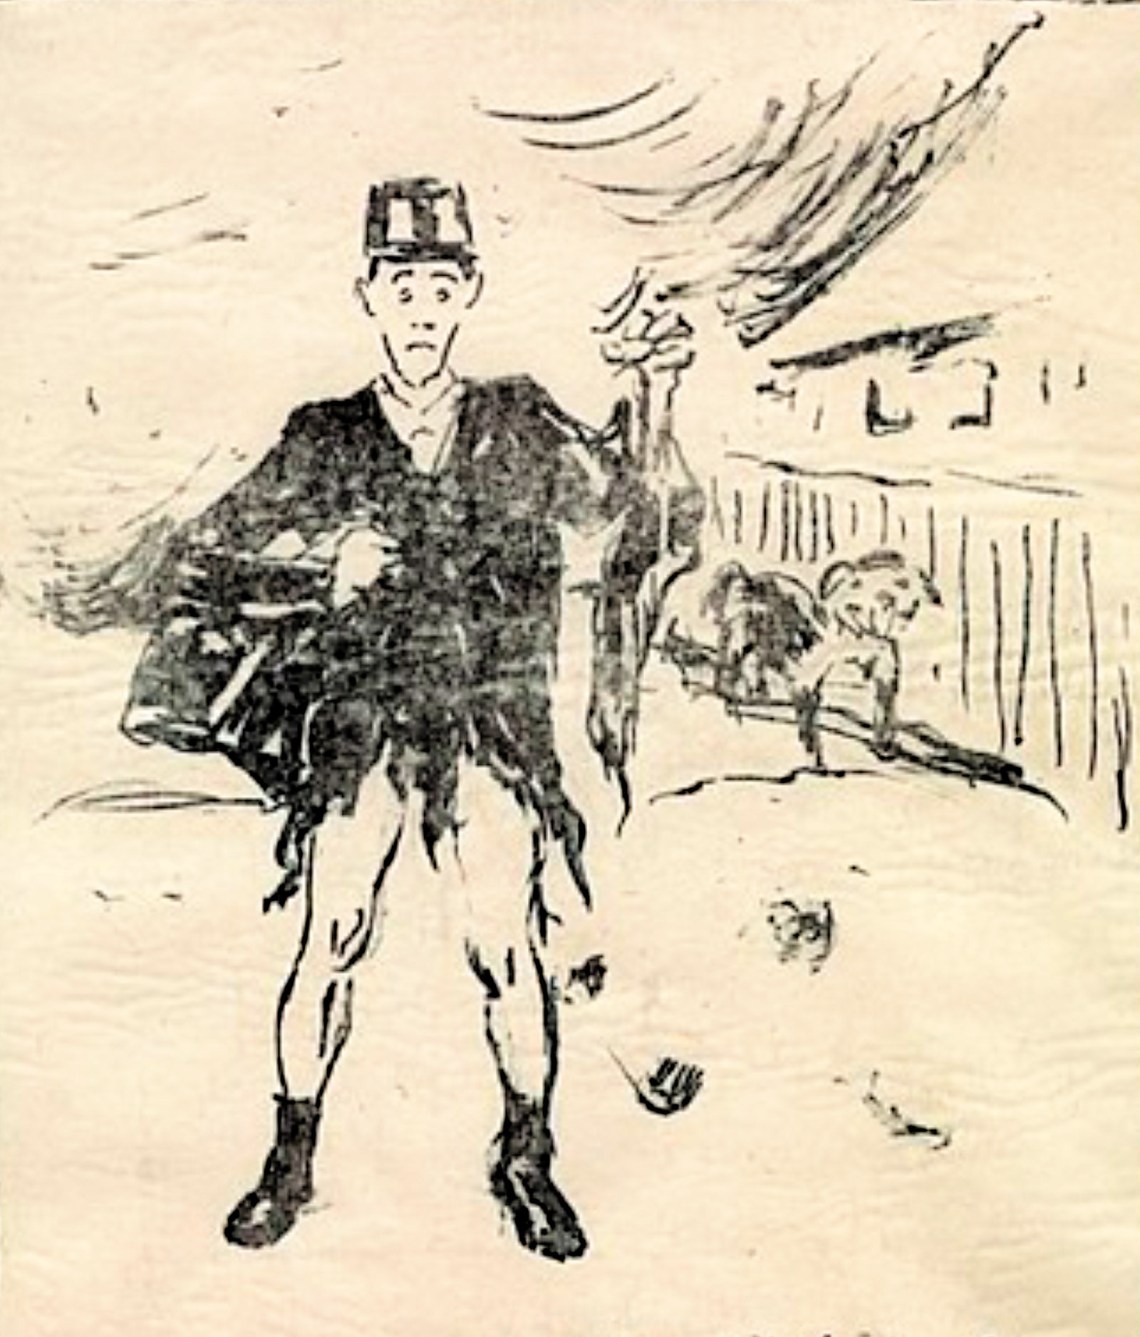 The Dog Attacking the Postman; illustration by Edvard Munch